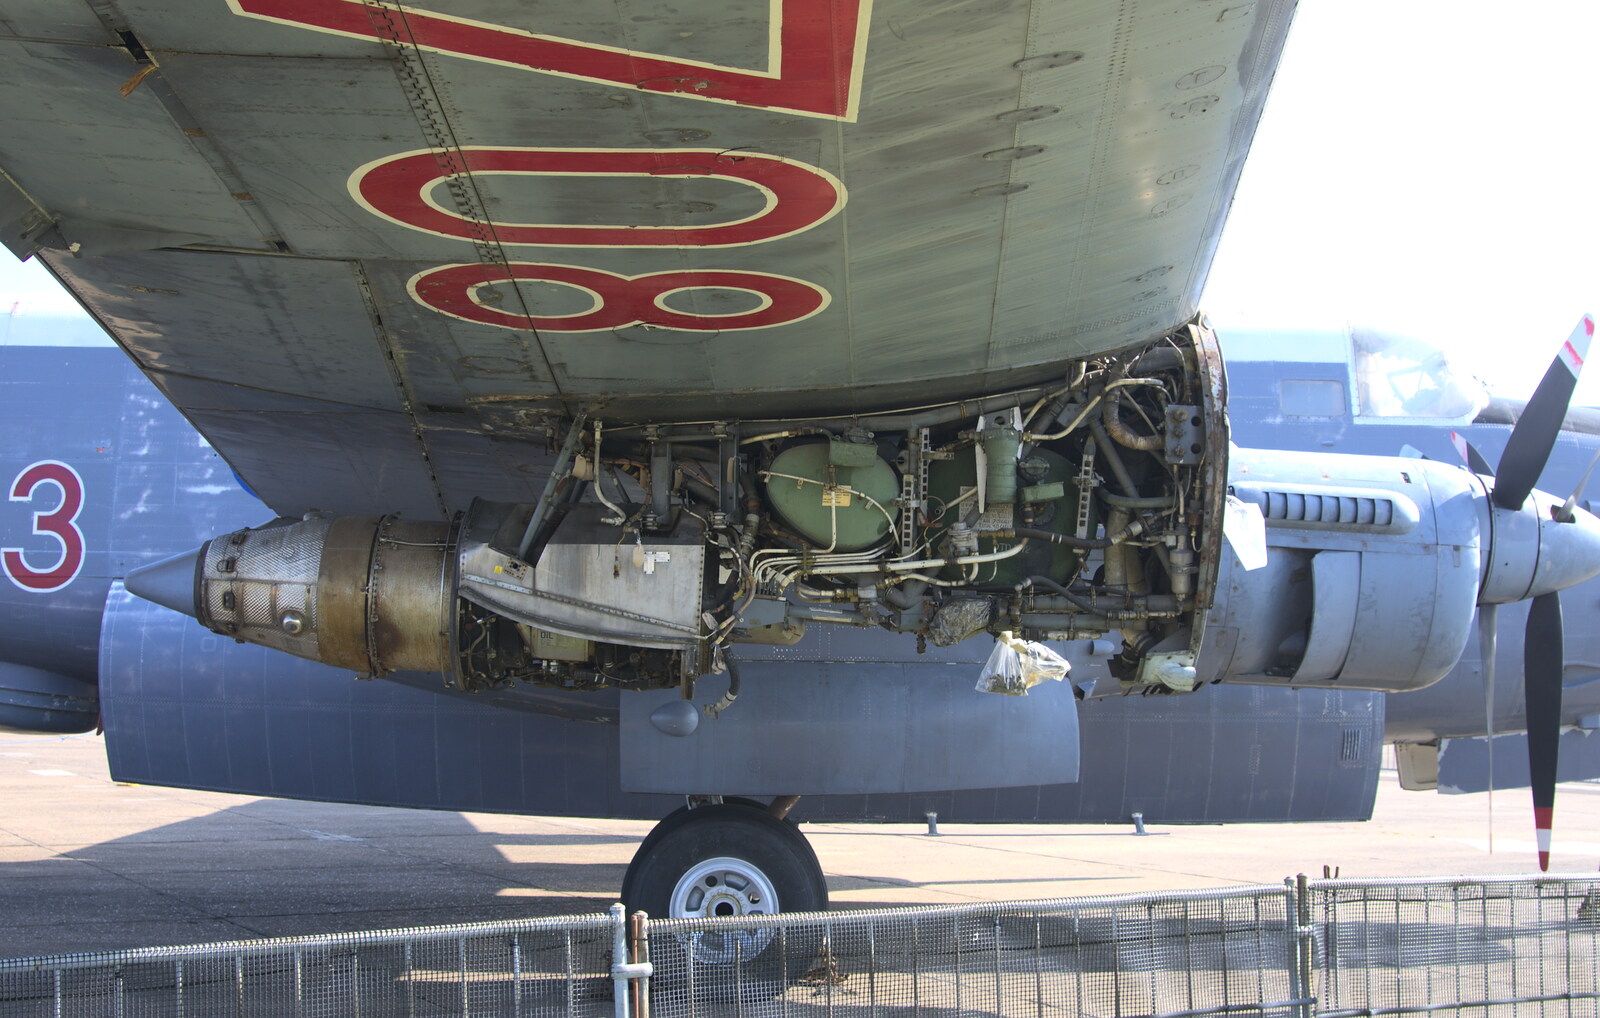 Complex engine mechanics from A Day Out at Duxford, Cambridgeshire - 9th March 2014